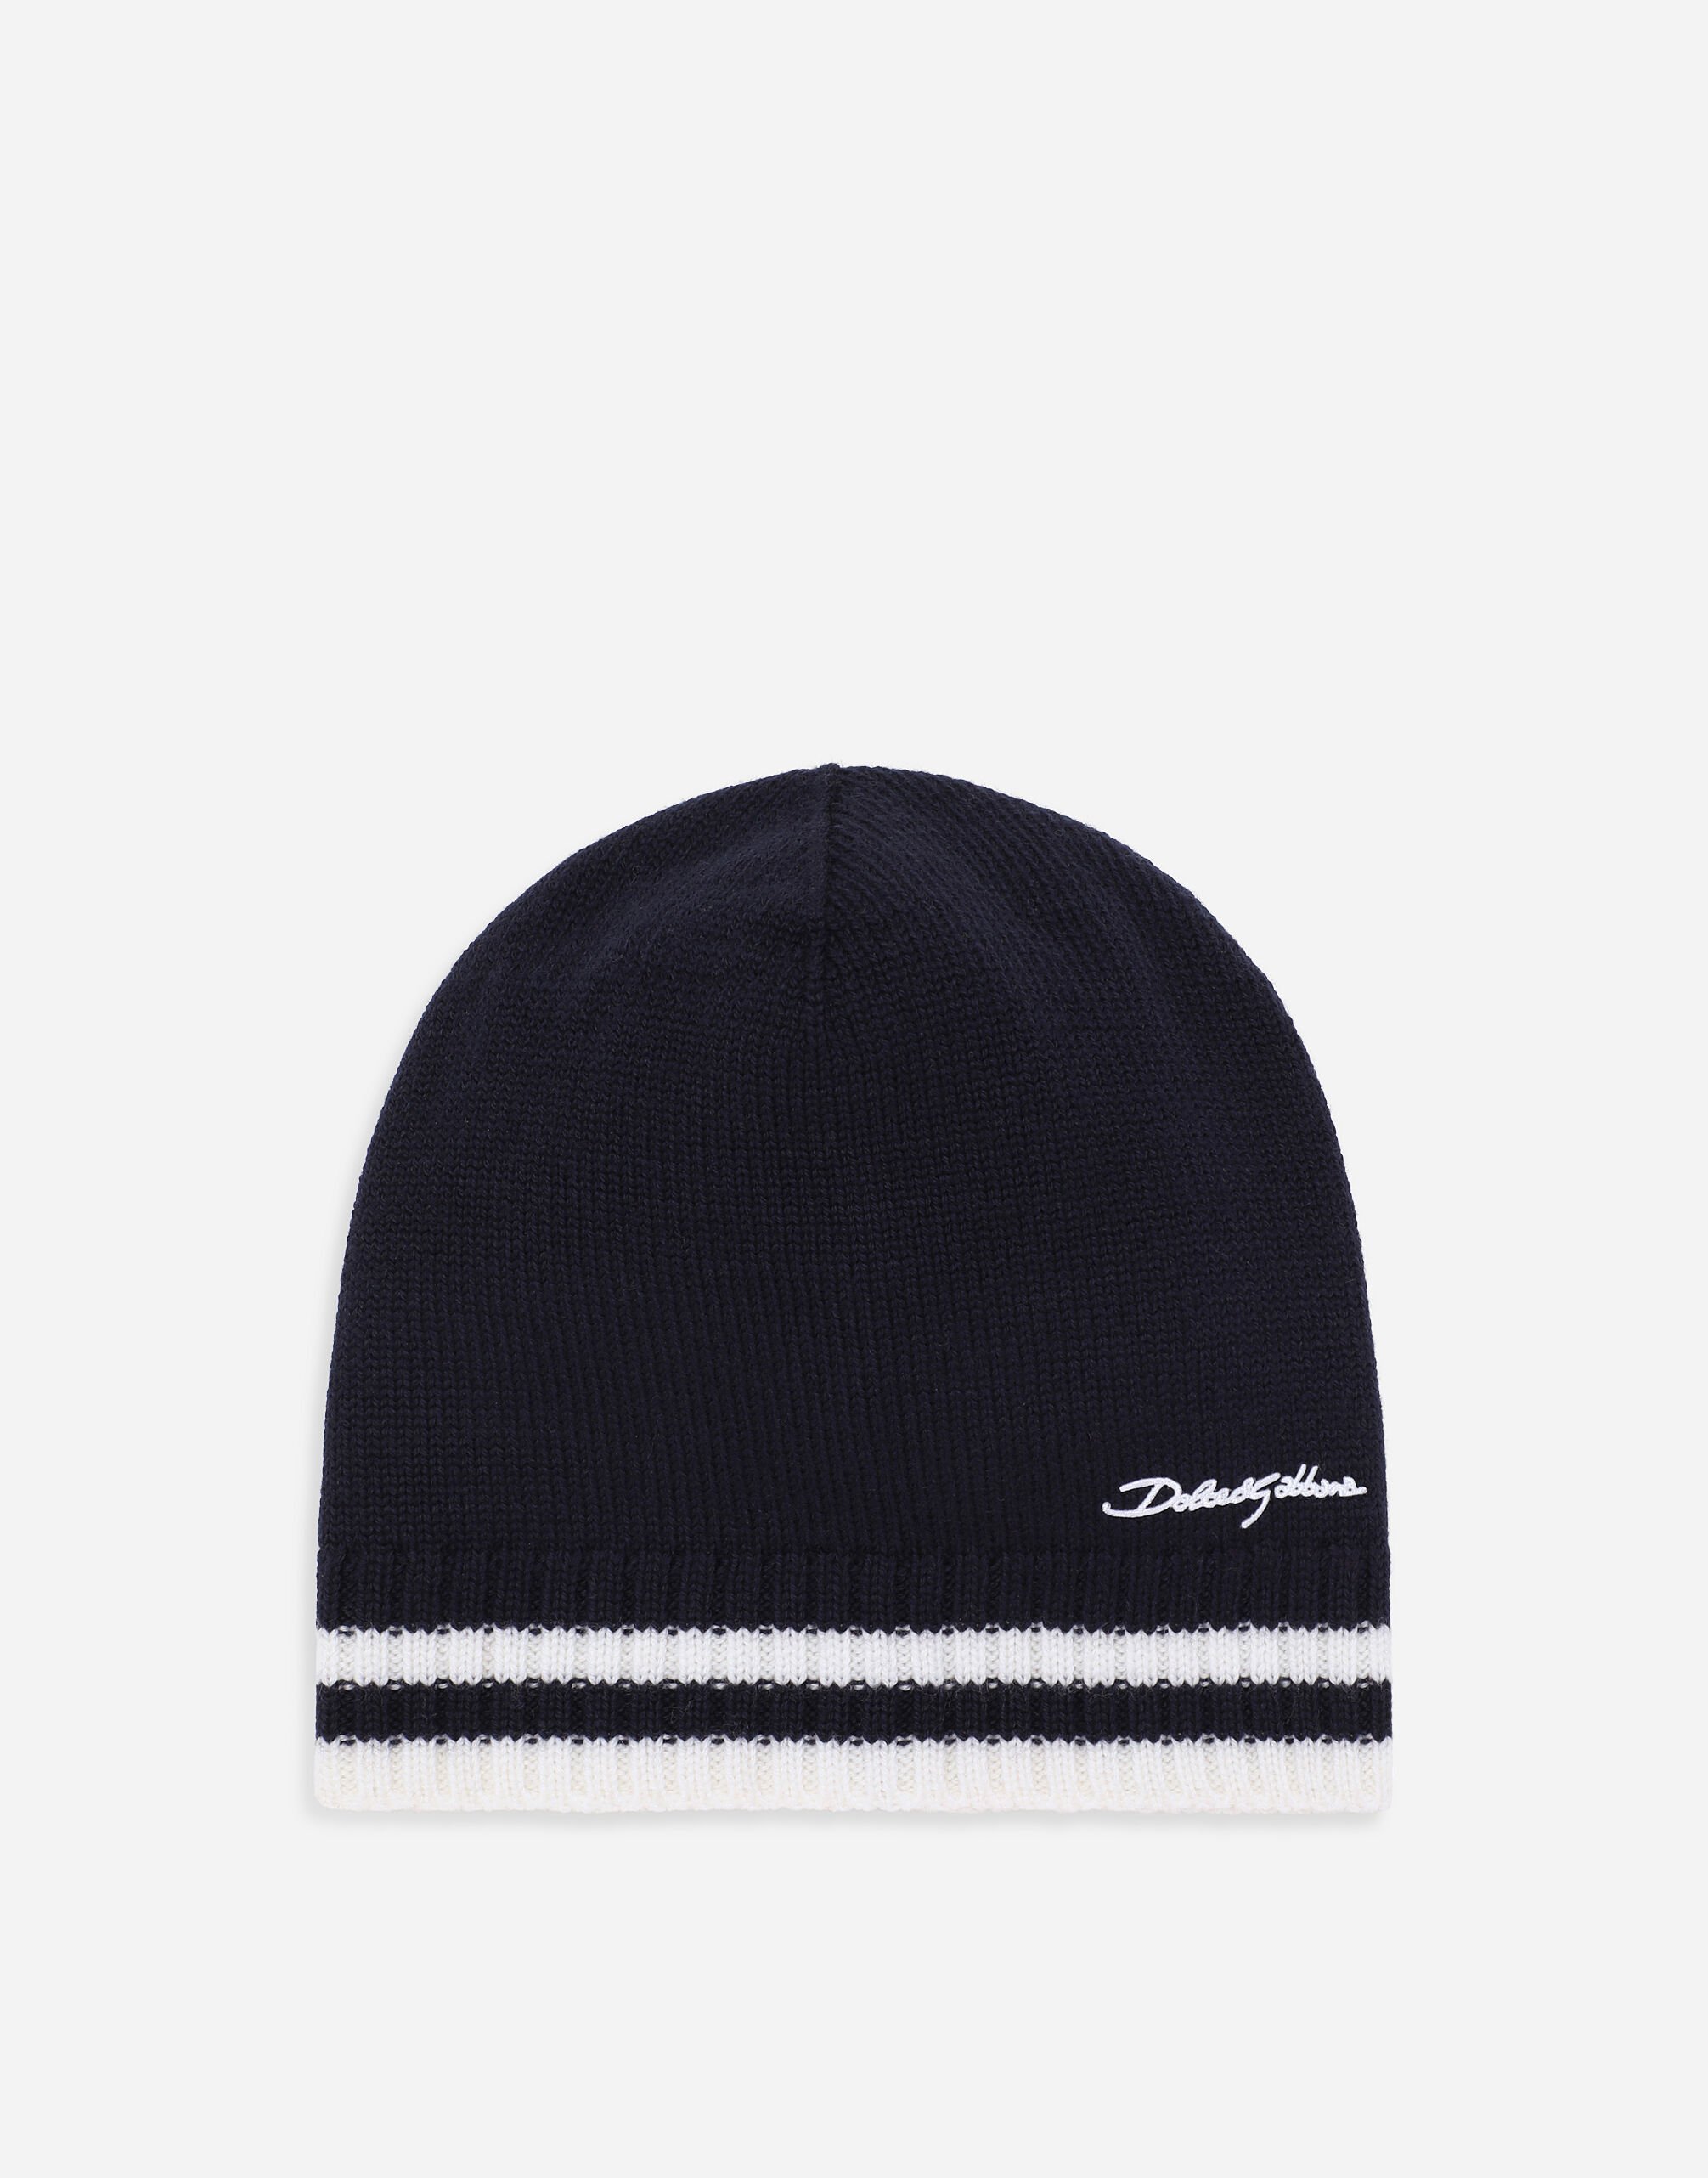 ${brand} Knit hat with Dolce&Gabbana logo ${colorDescription} ${masterID}